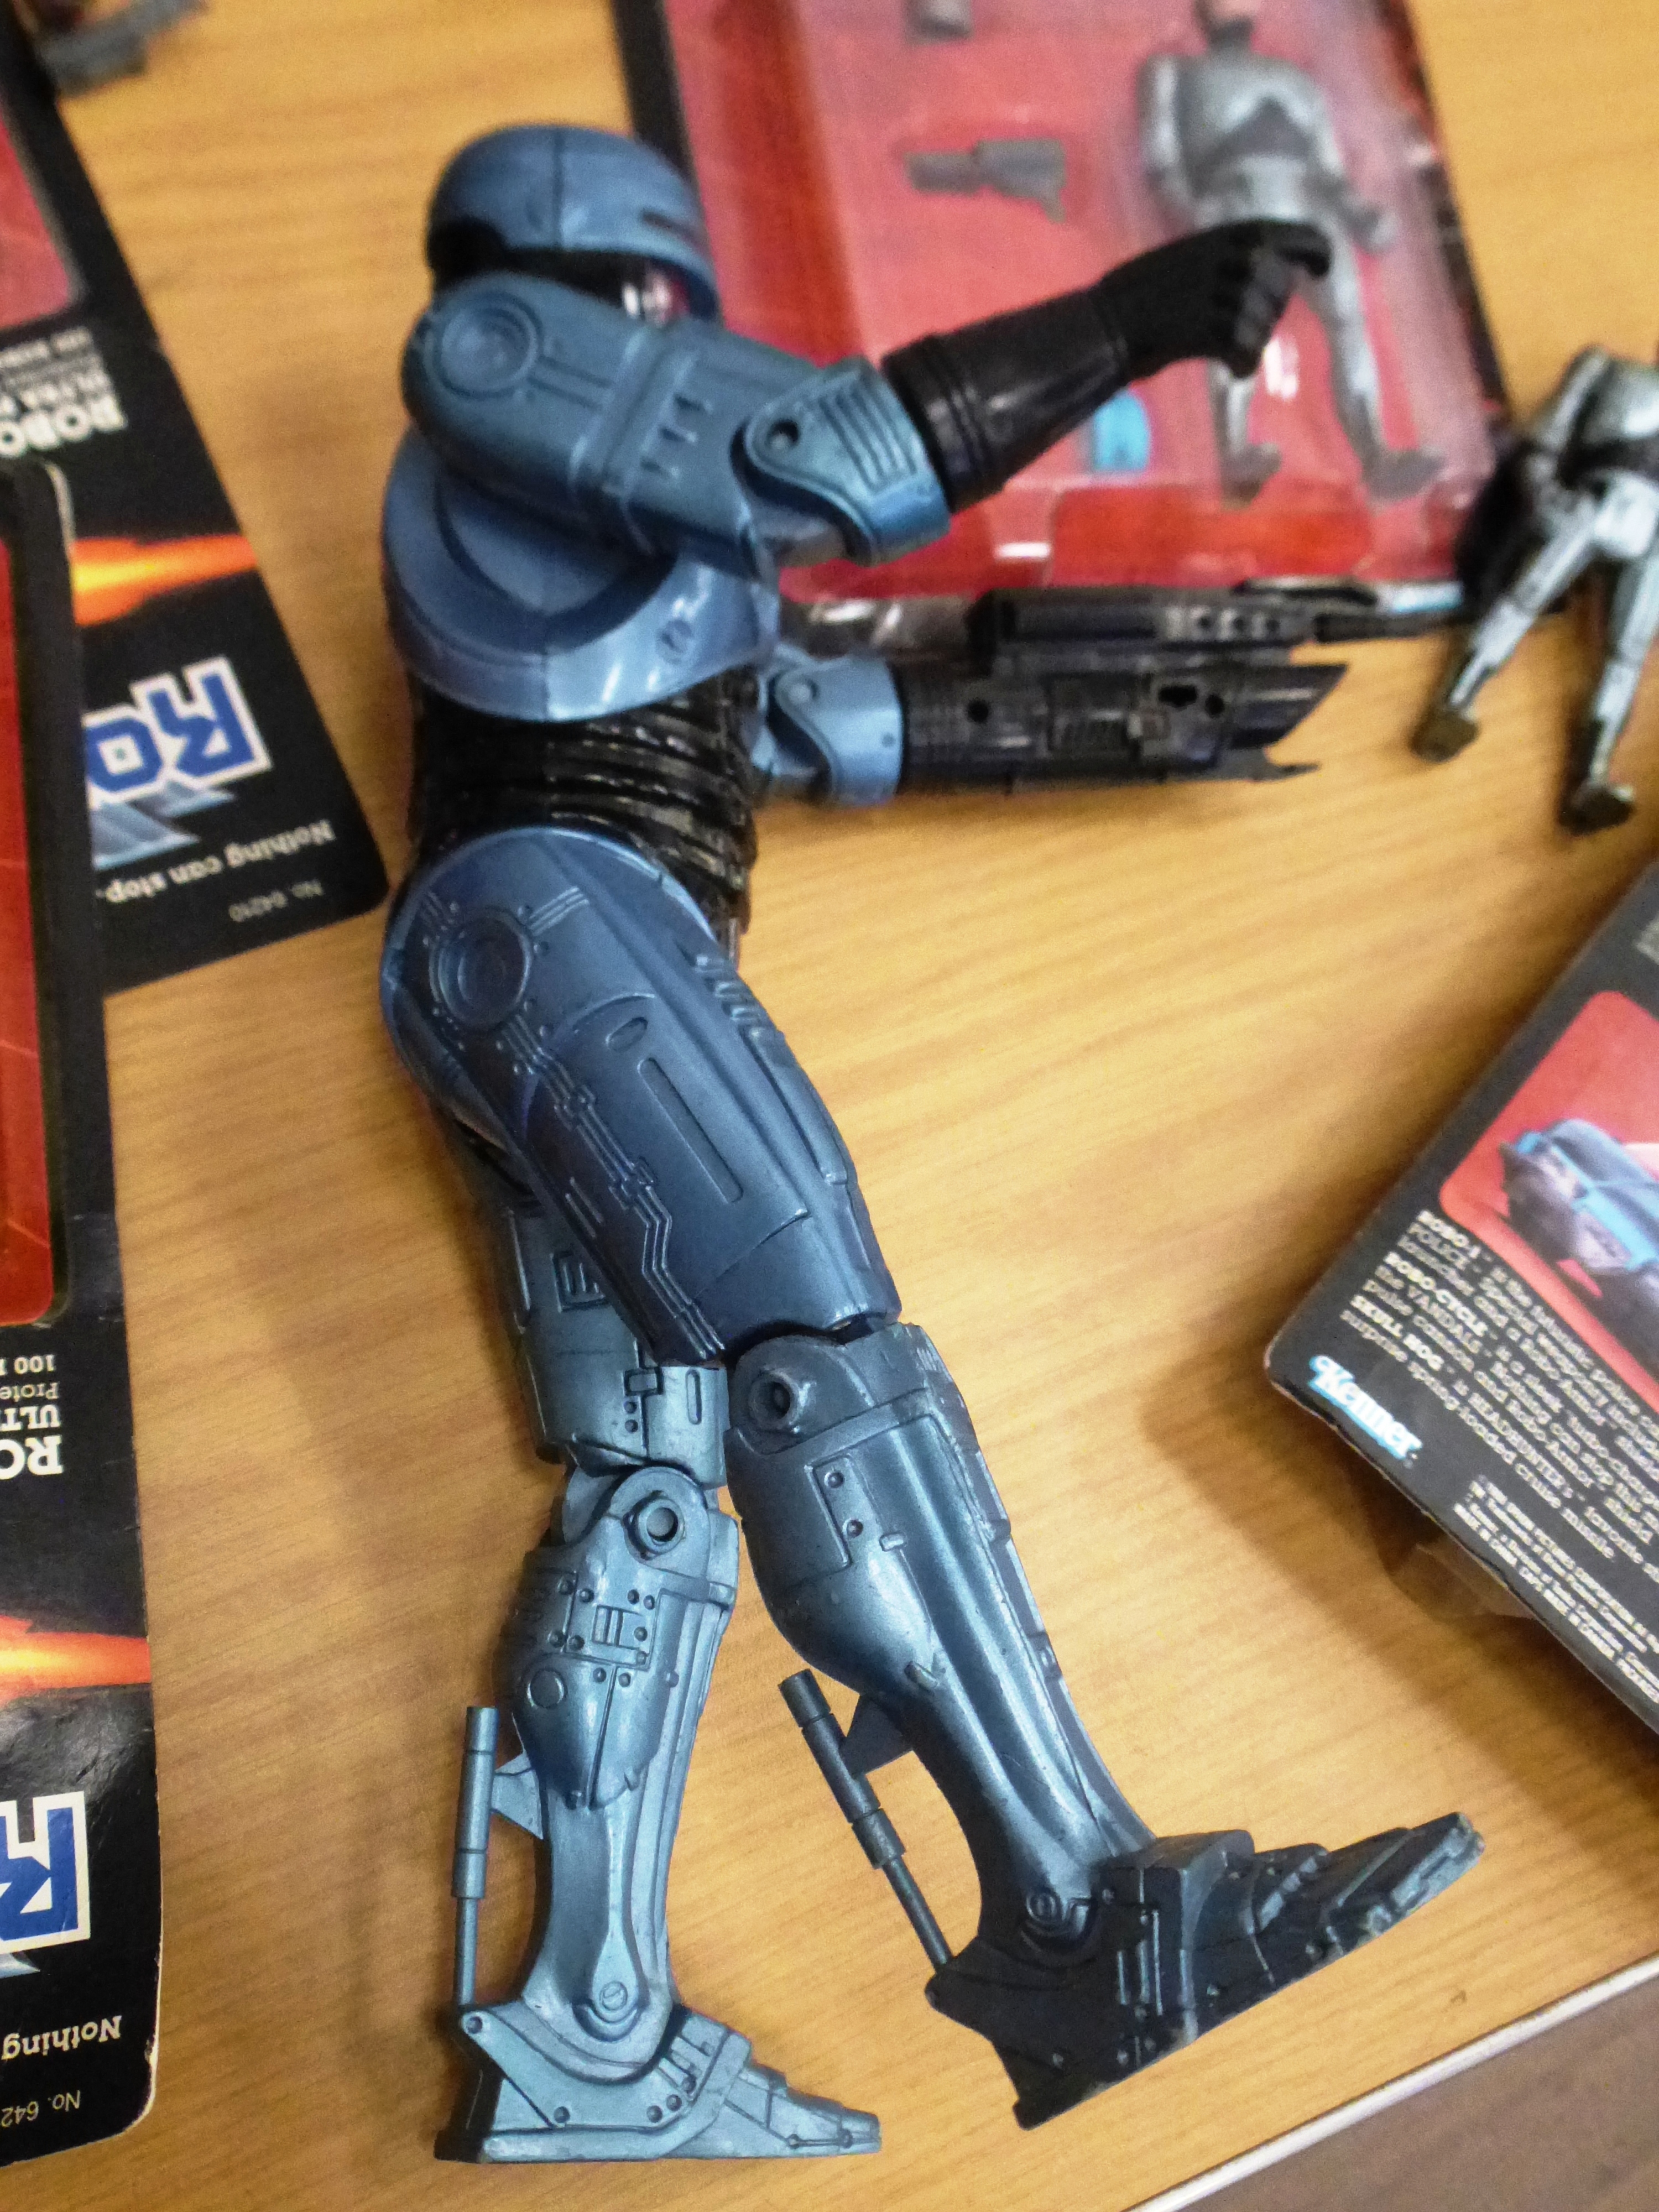 6 ROBOCOP ULTRA POLICE LEADER FIGURES AND A LARGE ROBOCOP FIGURE - Image 5 of 5